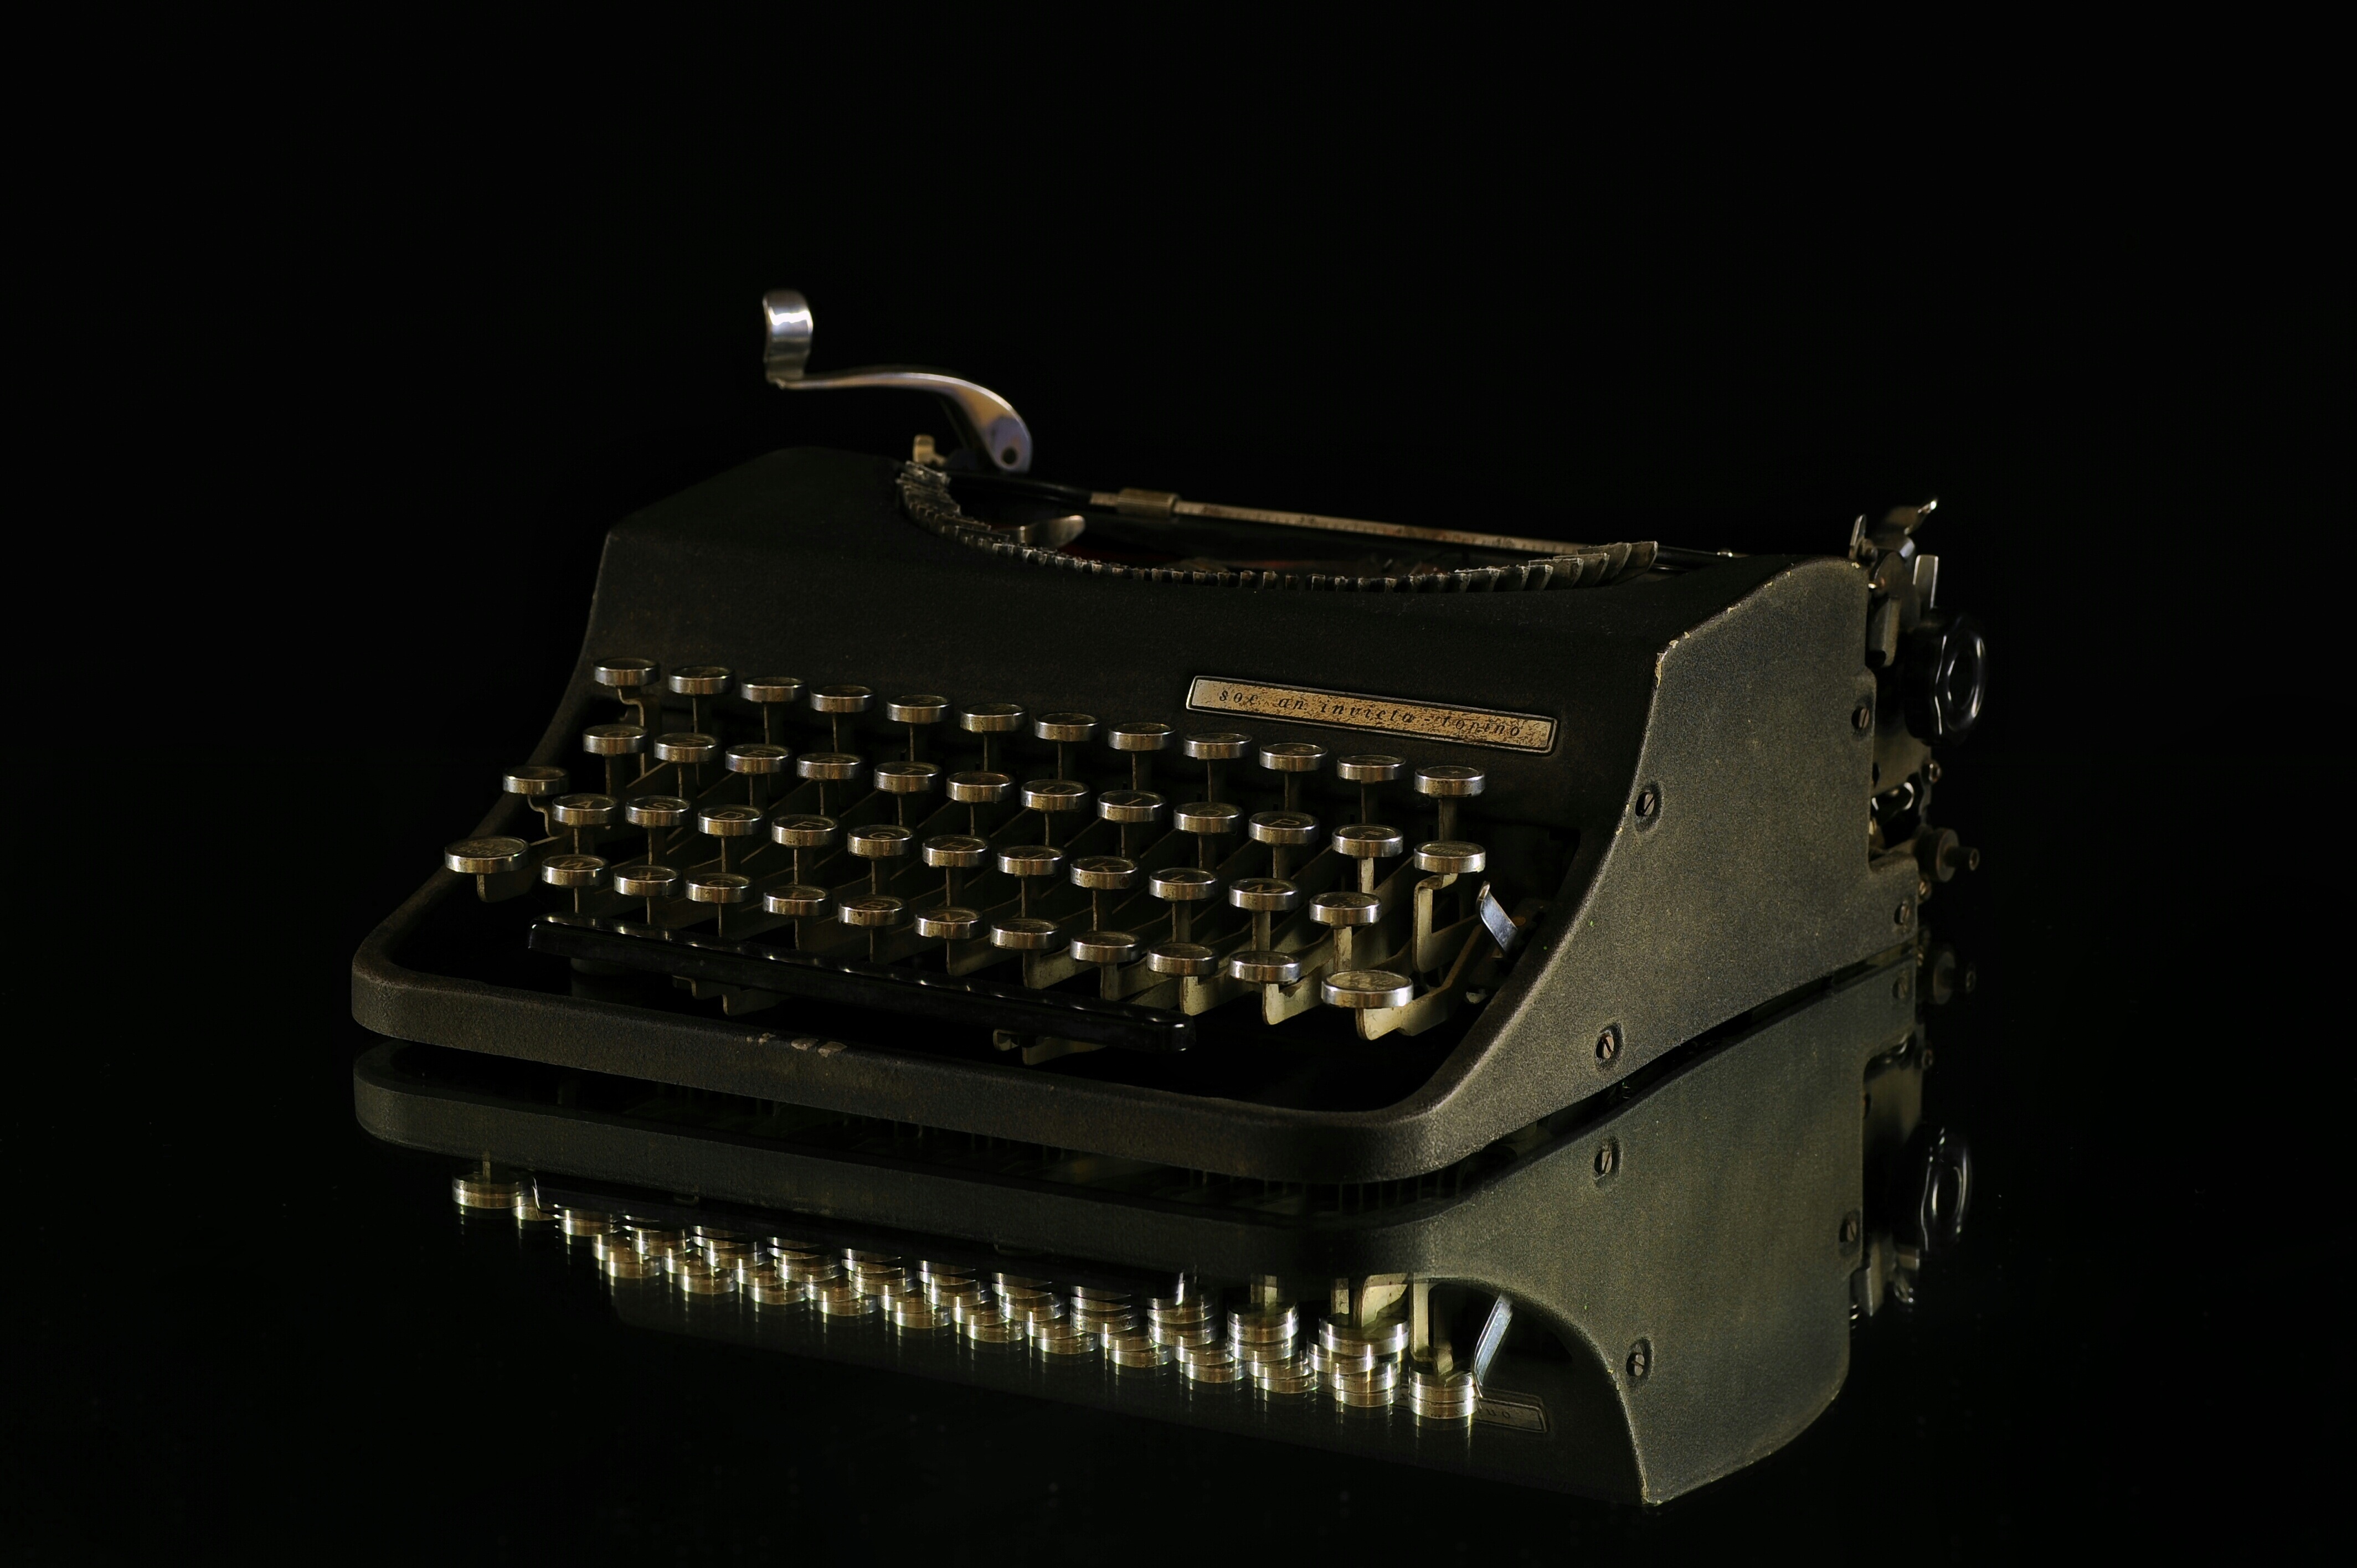 Old antique typewriter by Hannibal8height